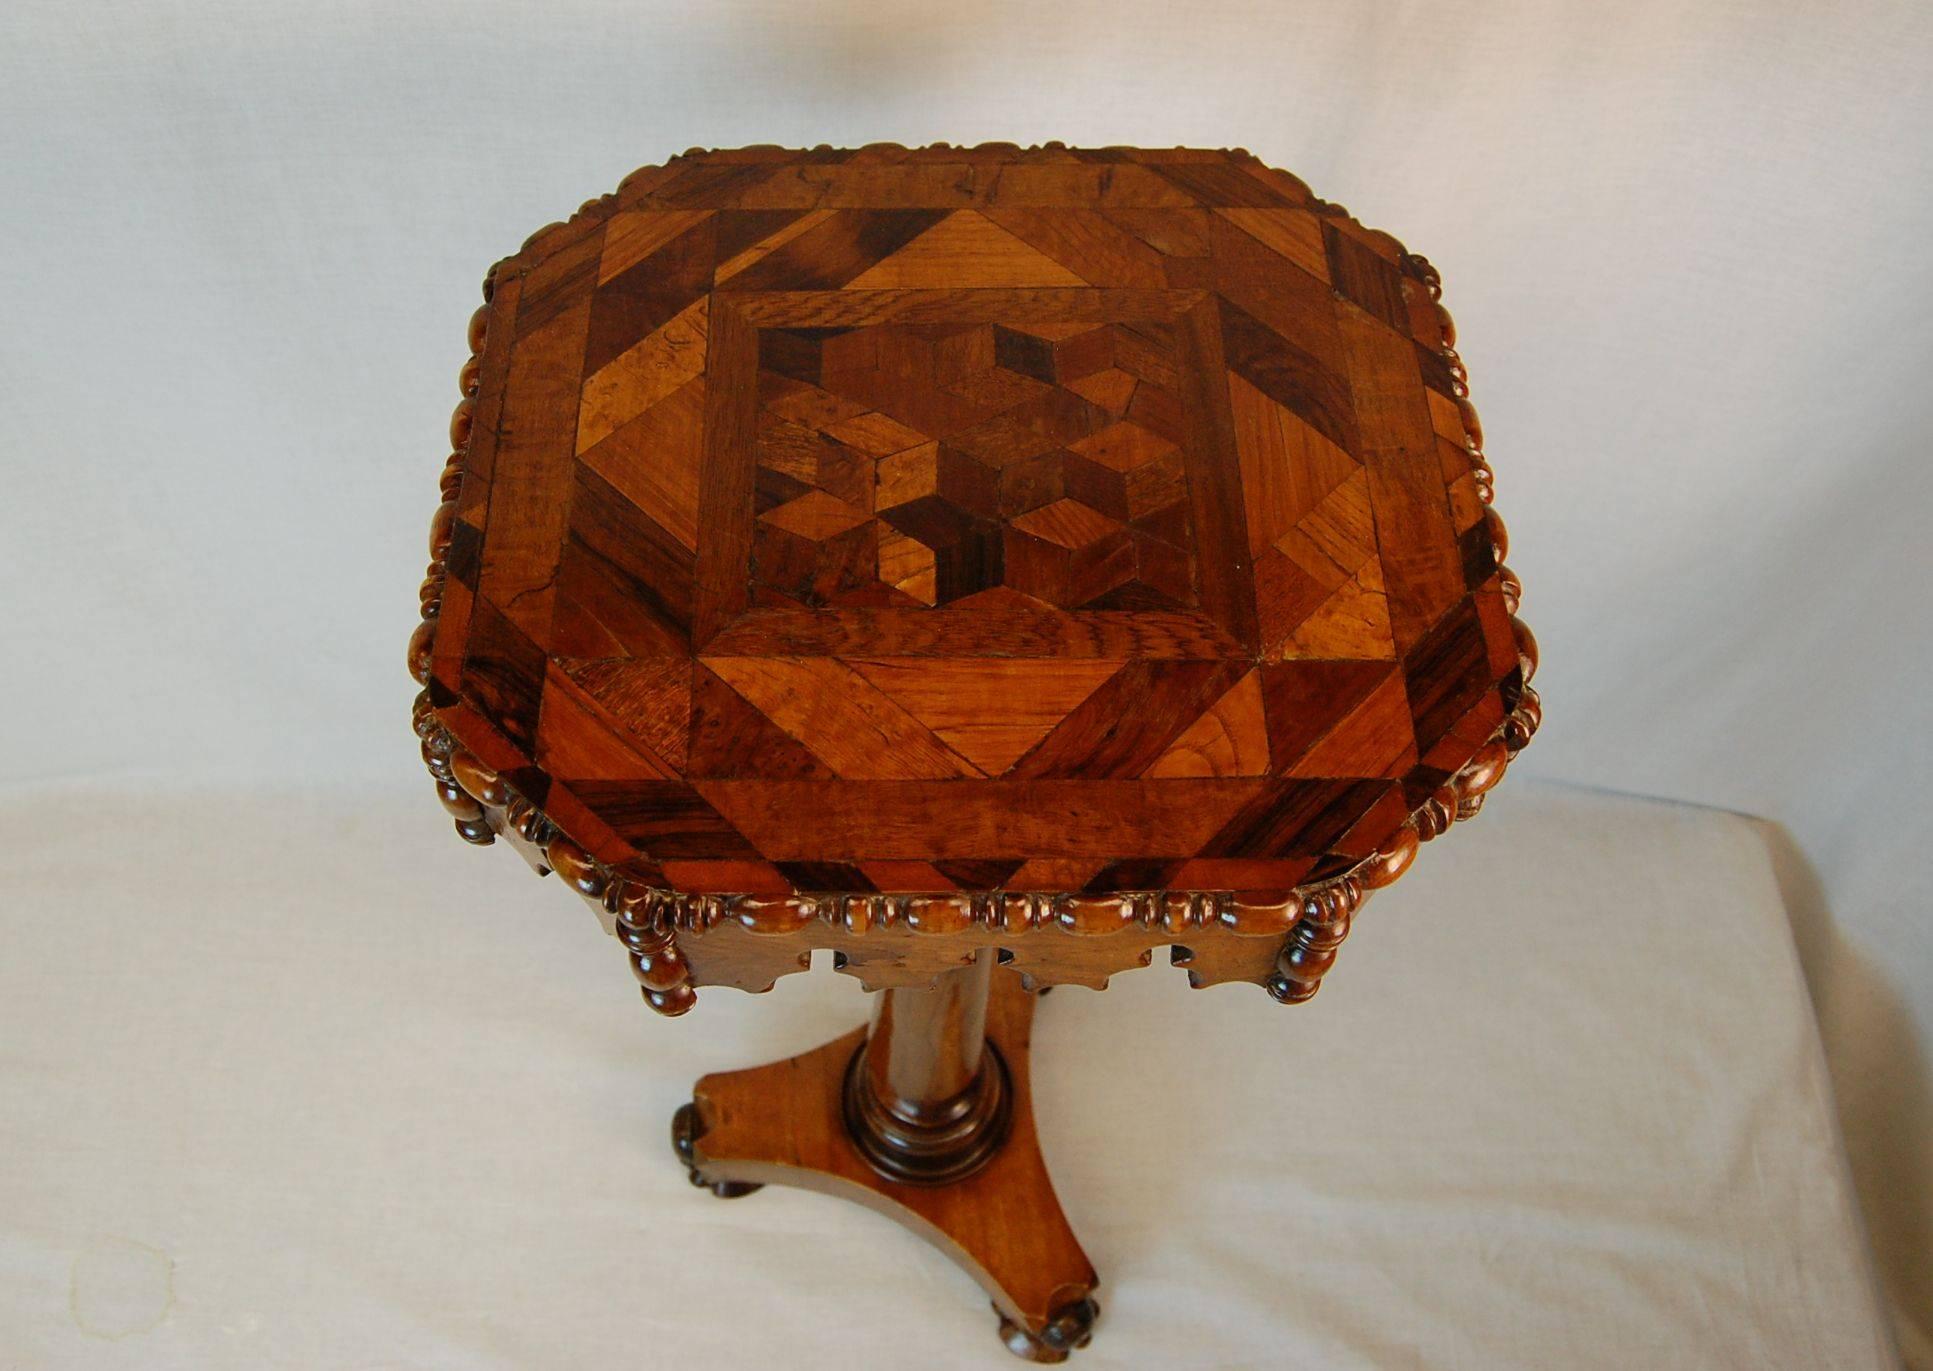 Hand-Crafted A William IV Parquetry Candle Stand with Octagonal Top and Gothic Themed Apron